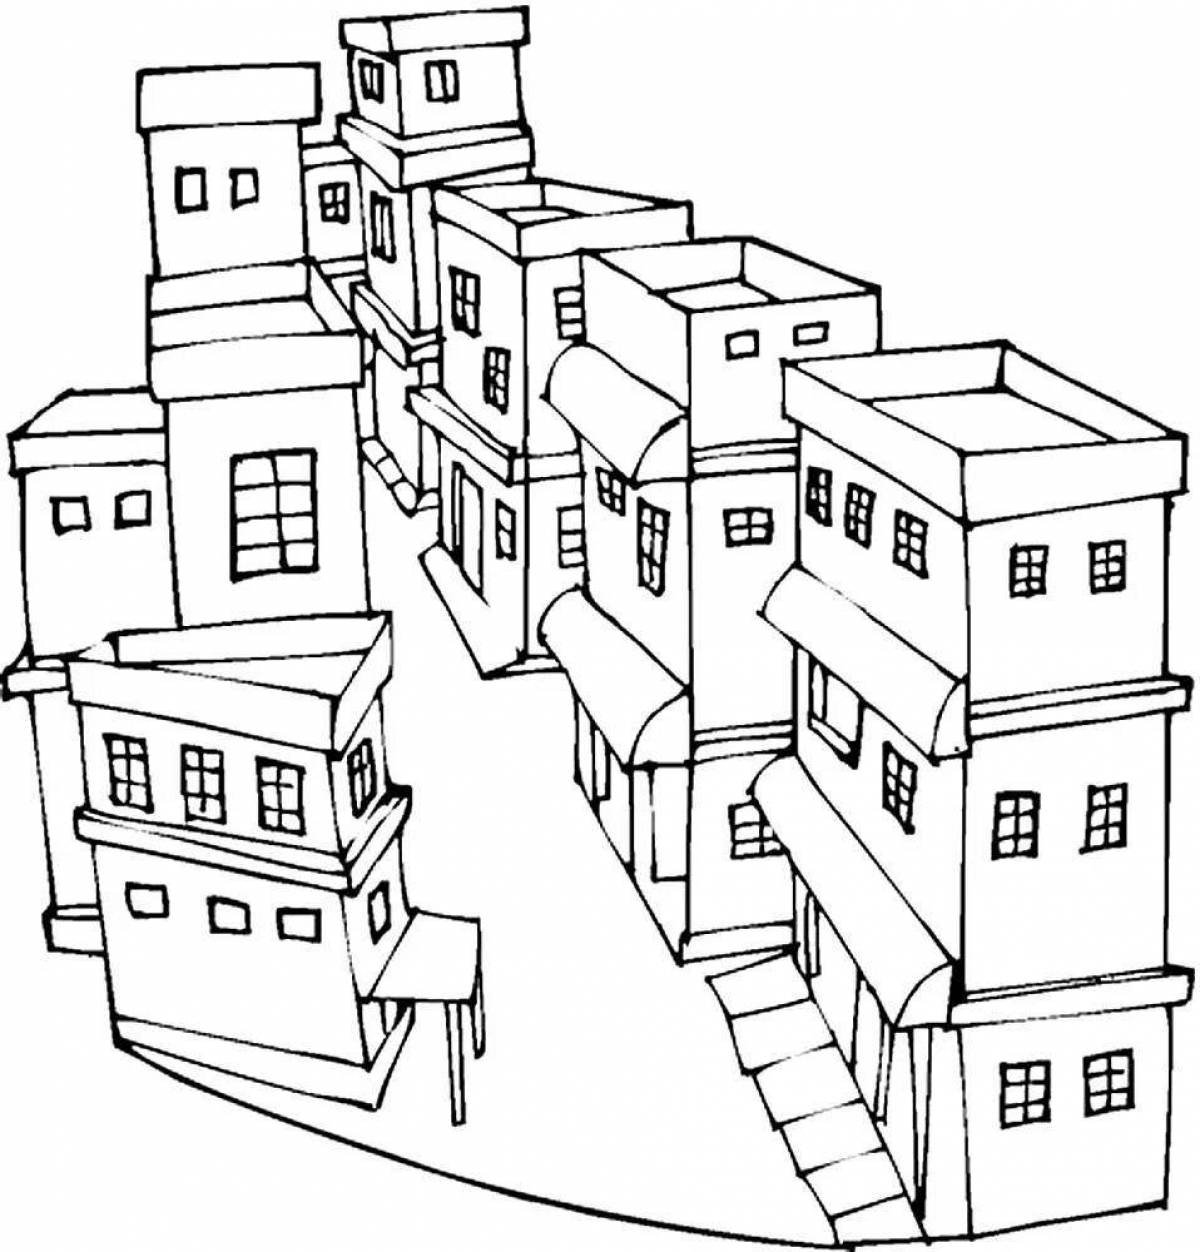 Colorful city street coloring pages for kids